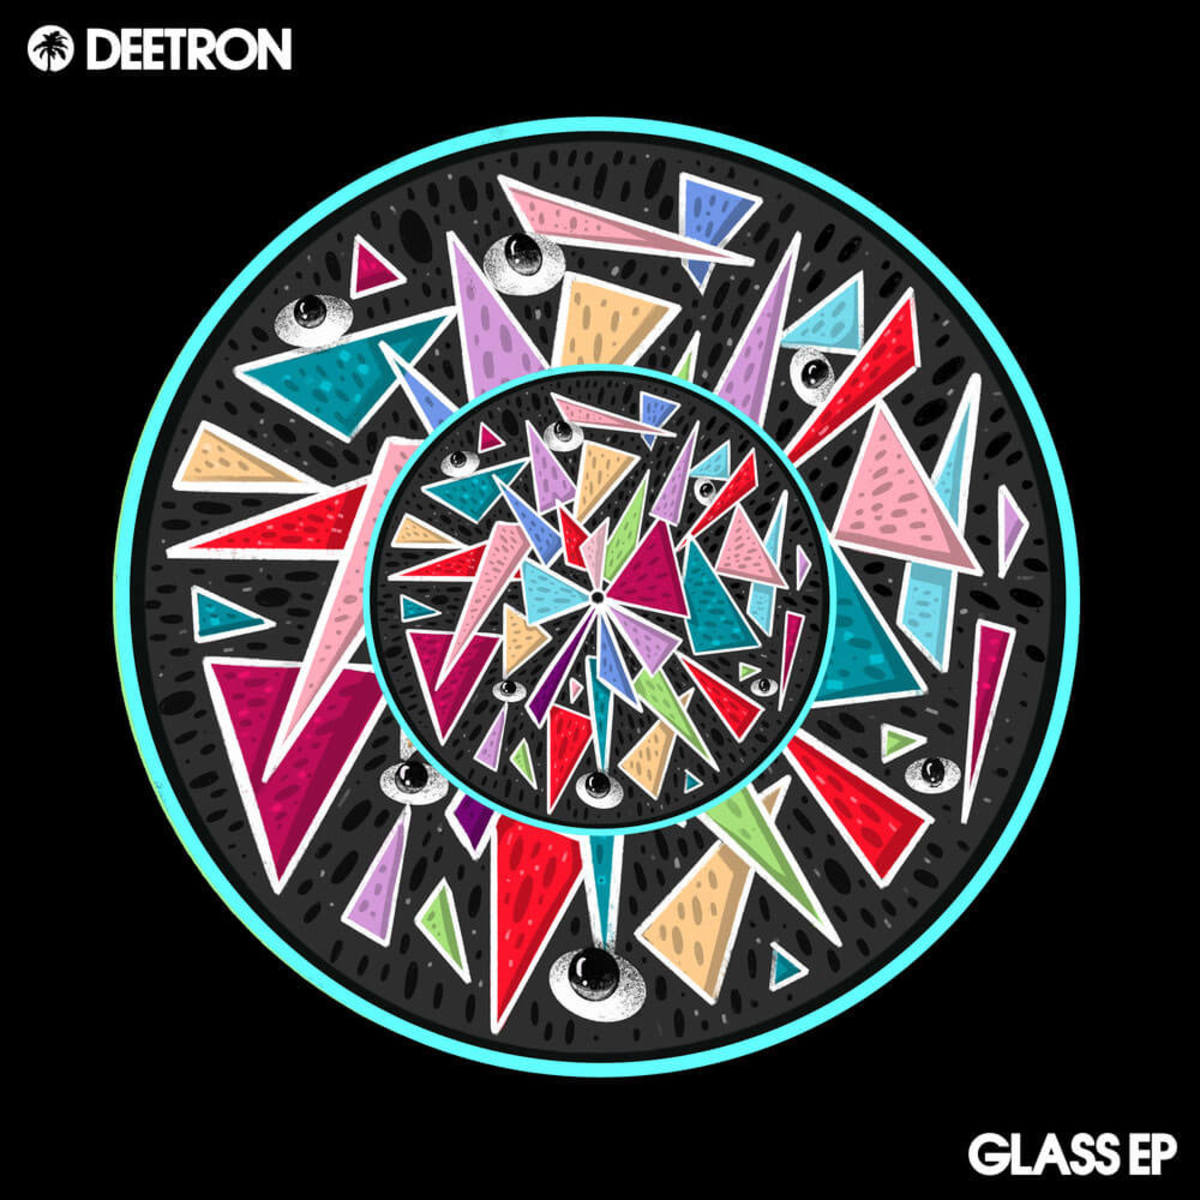 Deetron - Come On Back